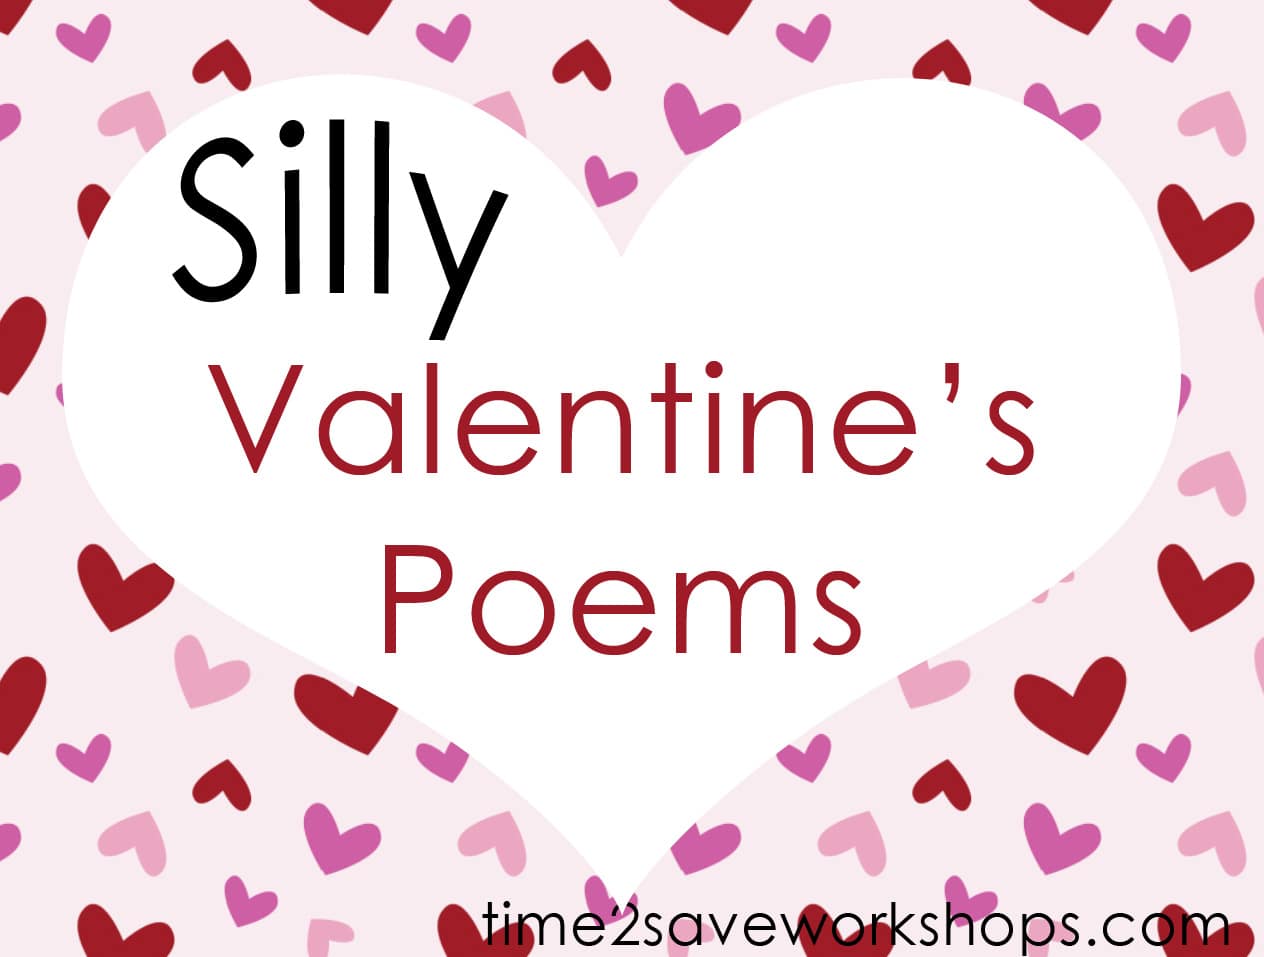 Silly Poems Valentine's: Fun with Words Poems for Children! - Kasey Trenum1264 x 957